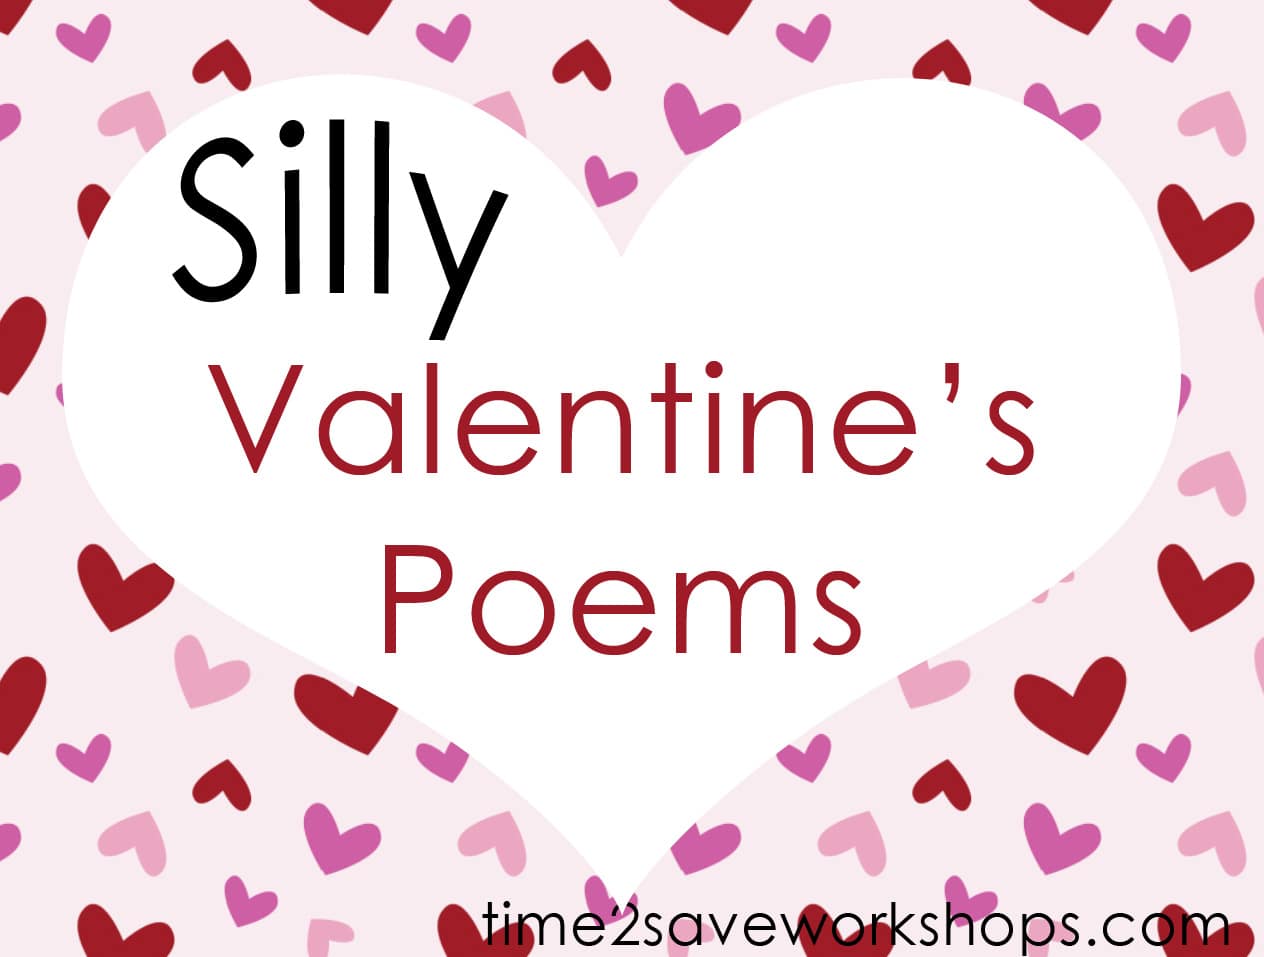 Silly Poems Valentine's: Fun with Words Poems for Children! - Kasey Trenum1264 x 957